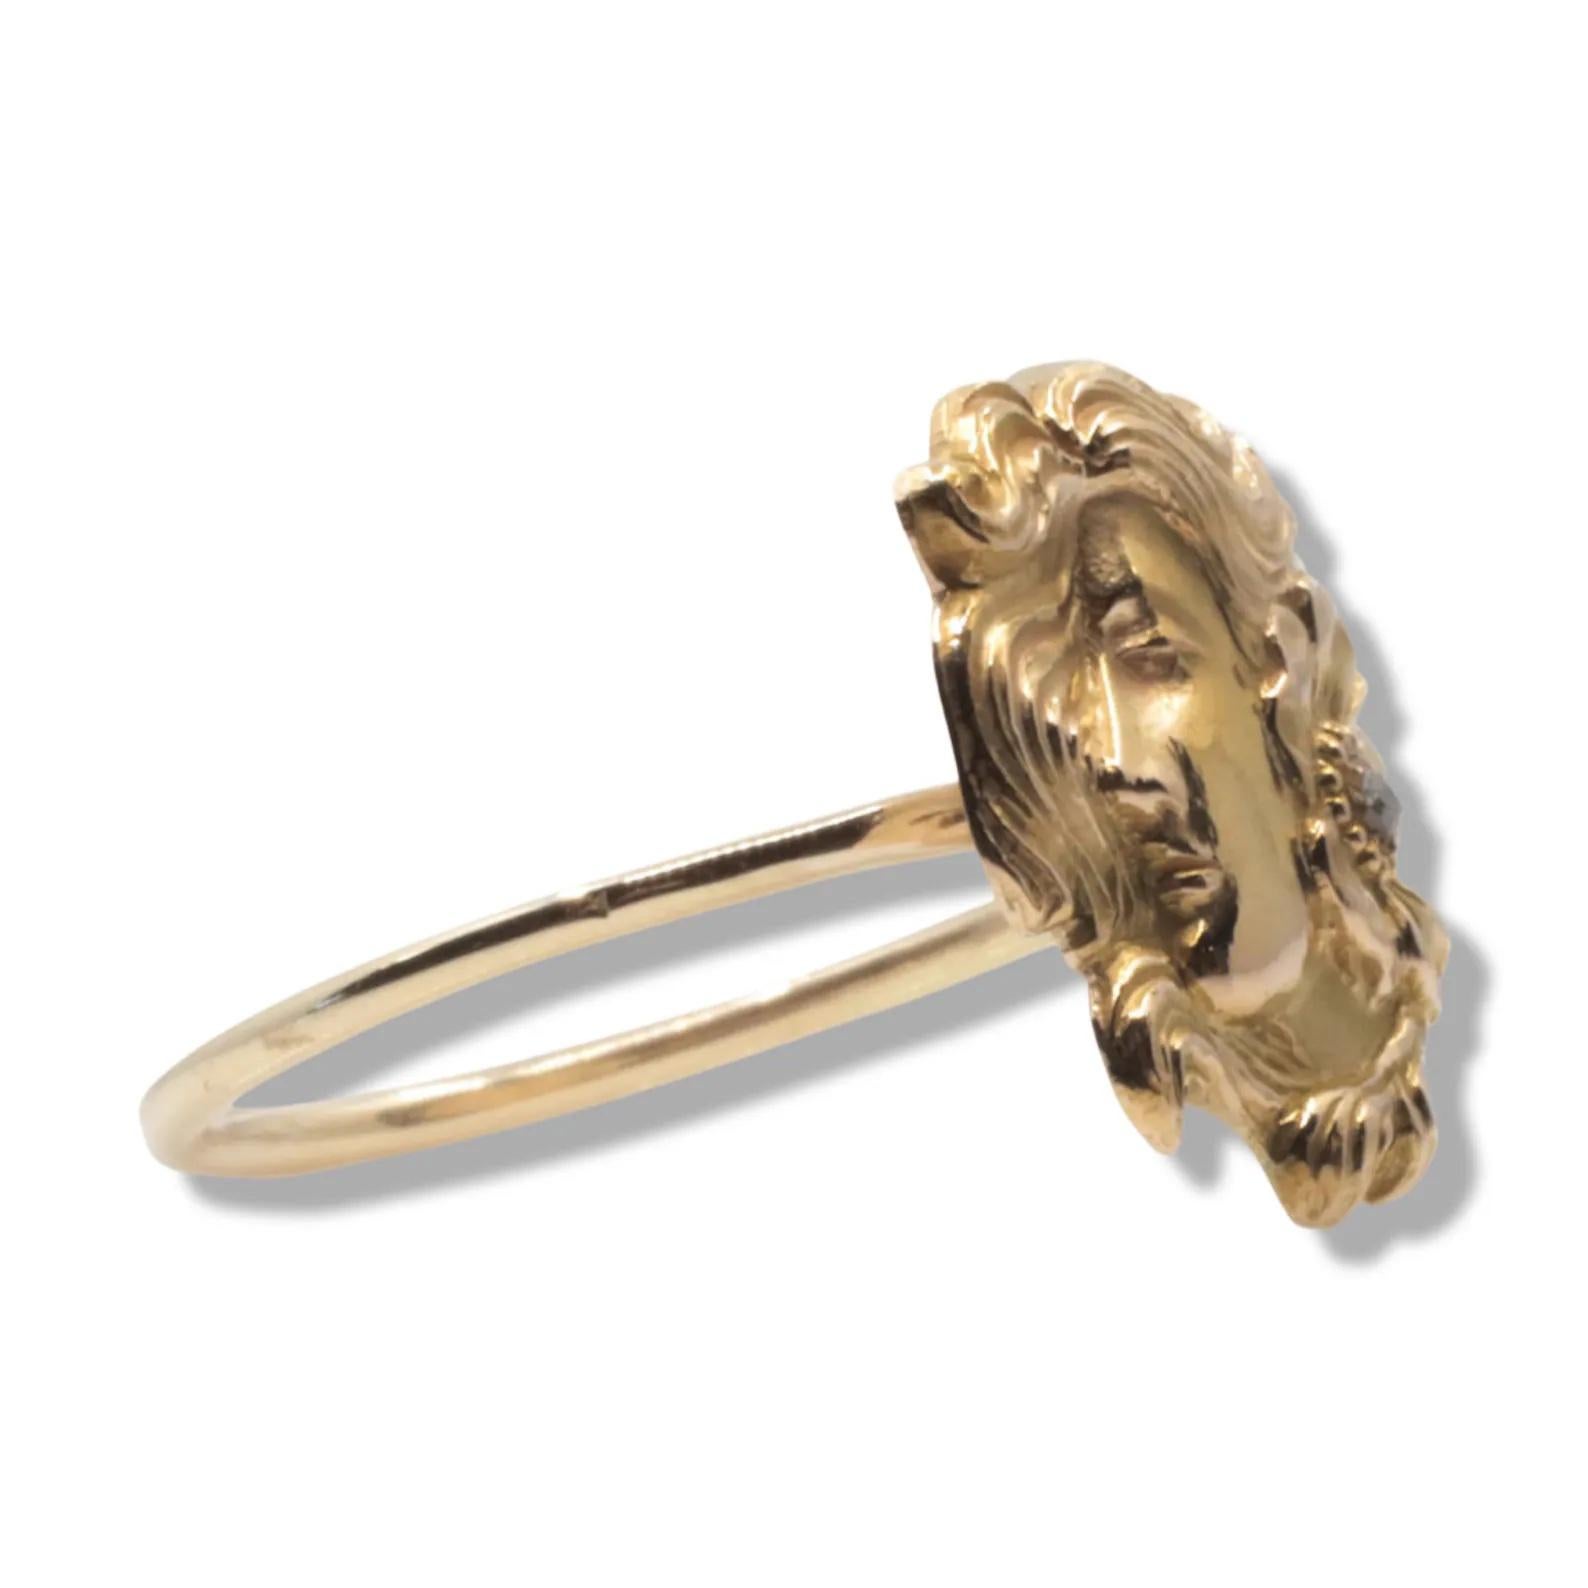 A beautiful handmade art nouveau period figural ring in 14 karat yellow gold. Accented by a single old mine cut diamond in a blossoming flower, this ring features the profile of a beautiful woman with flowing gold hair.

In excellent condition this